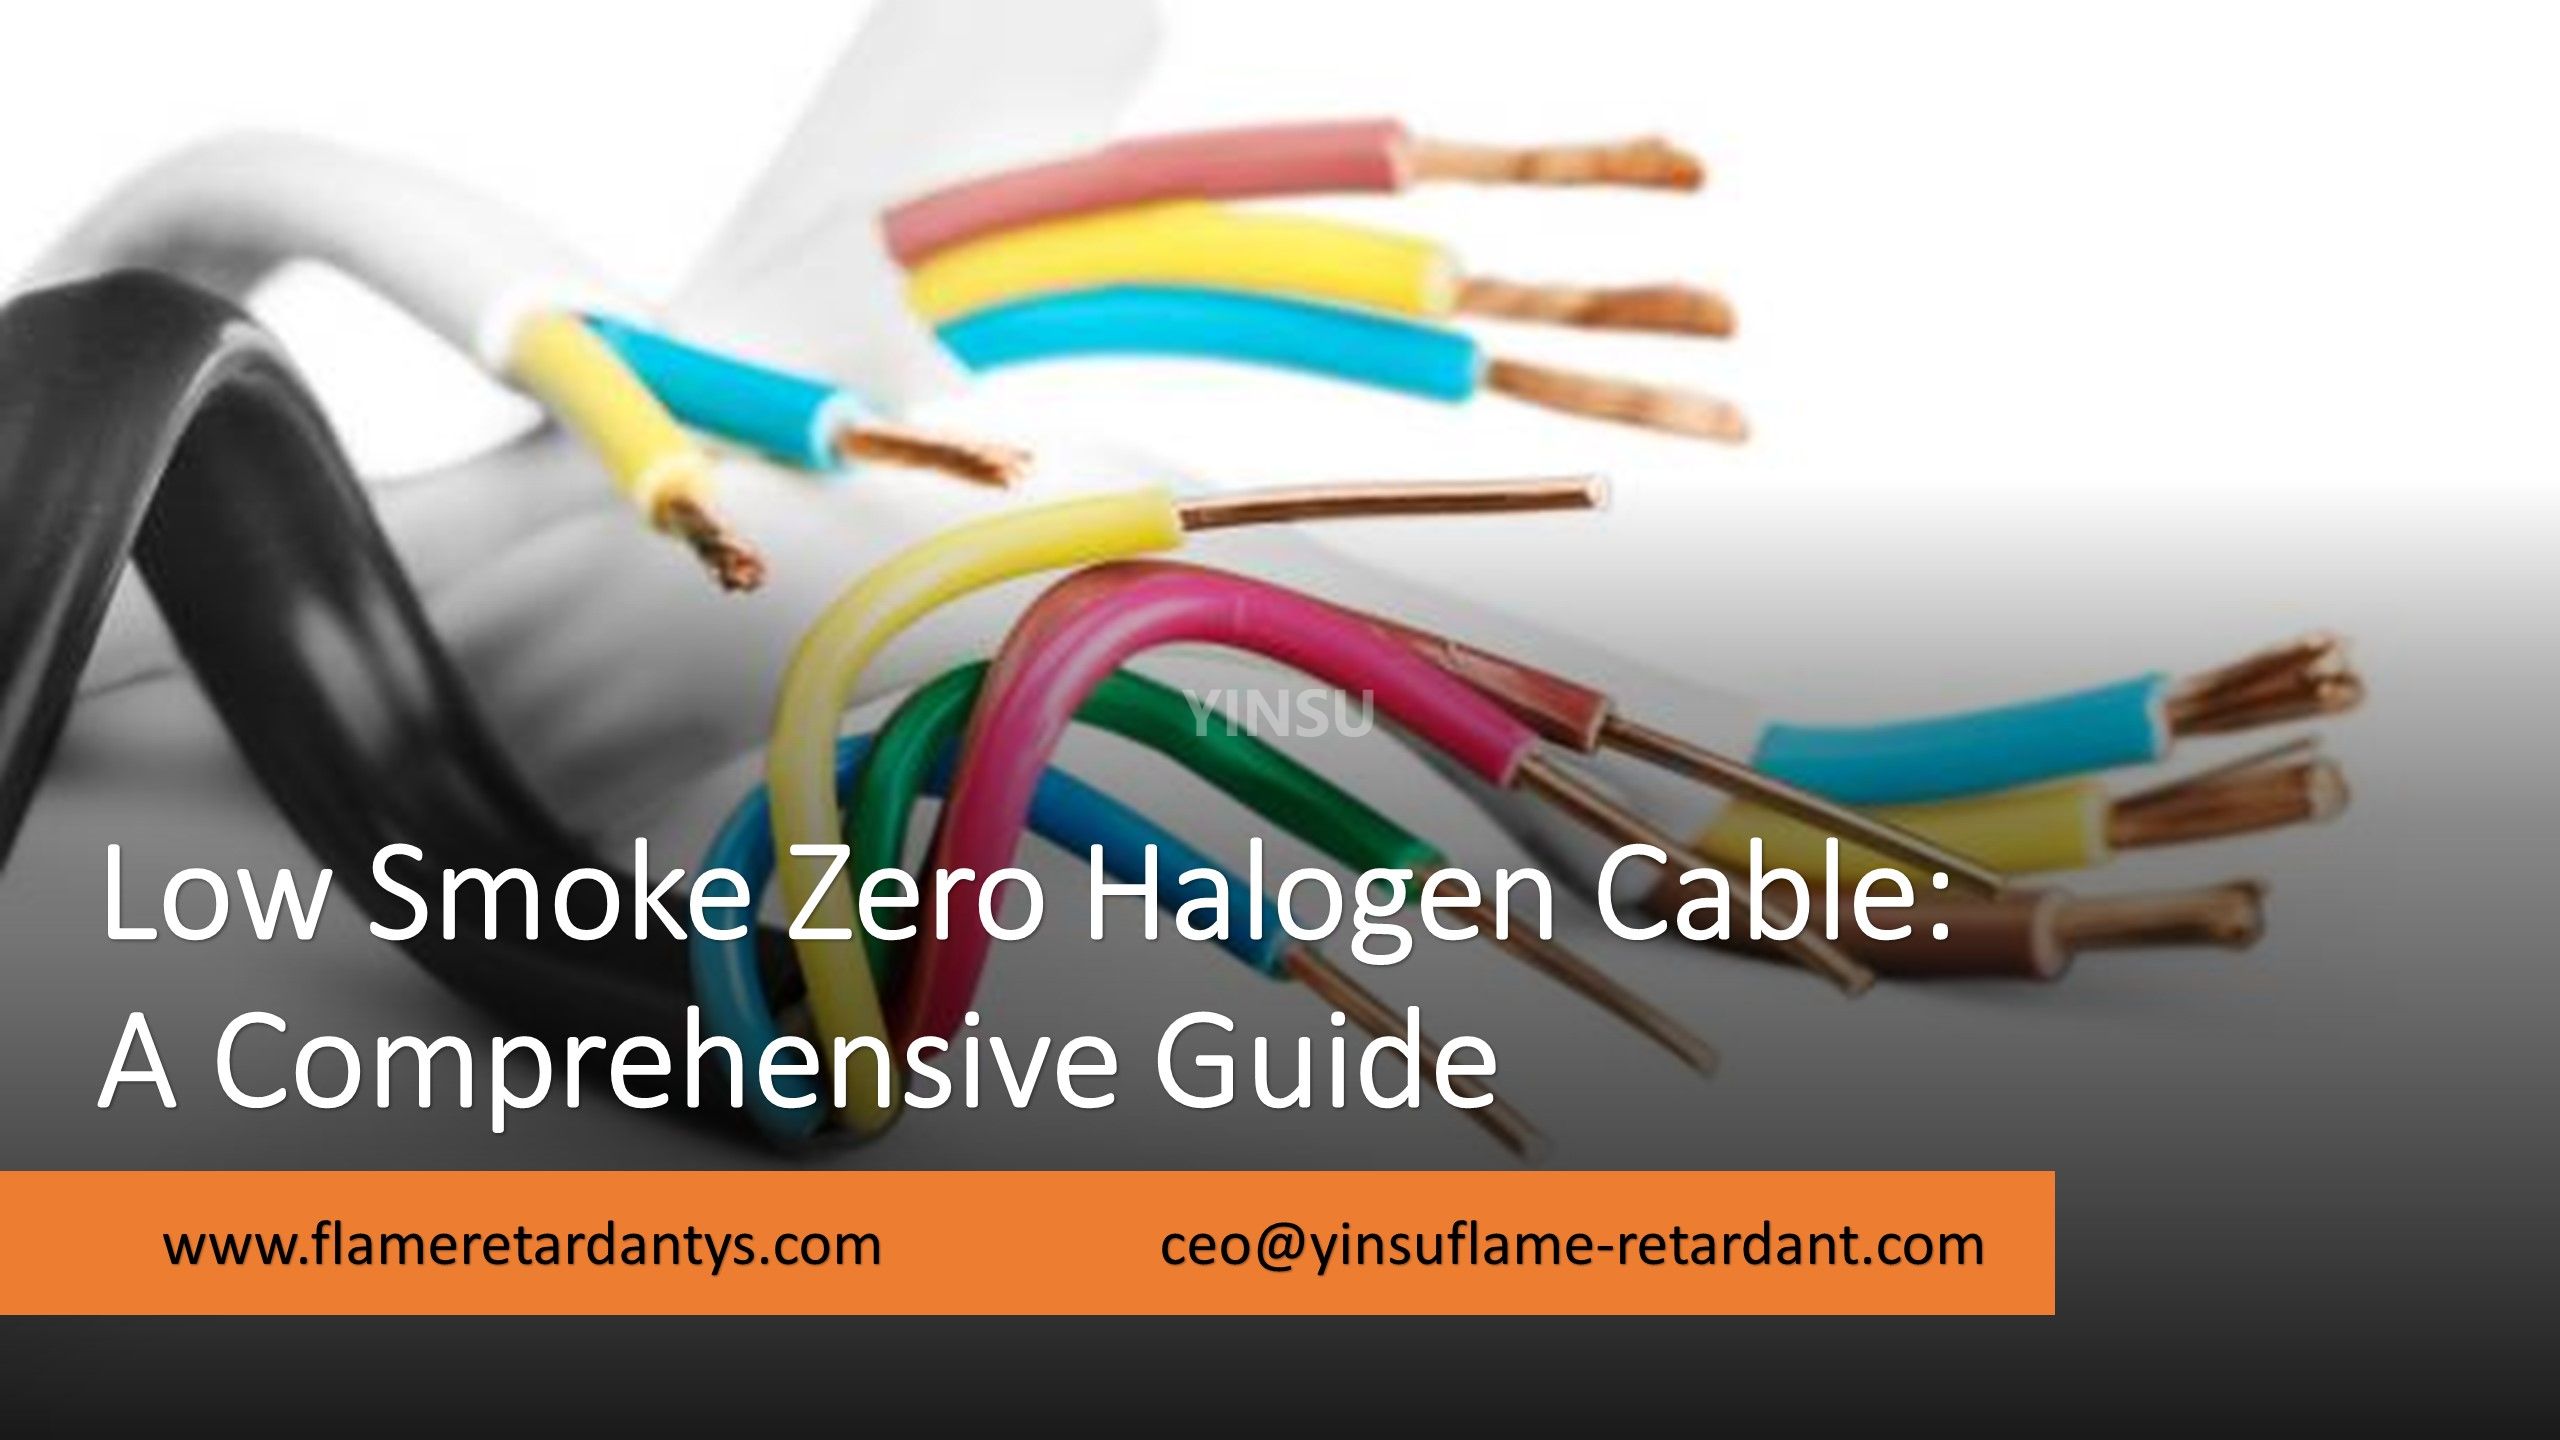 Low Smoke Zero Halogen Cable: A Comprehensive Guide